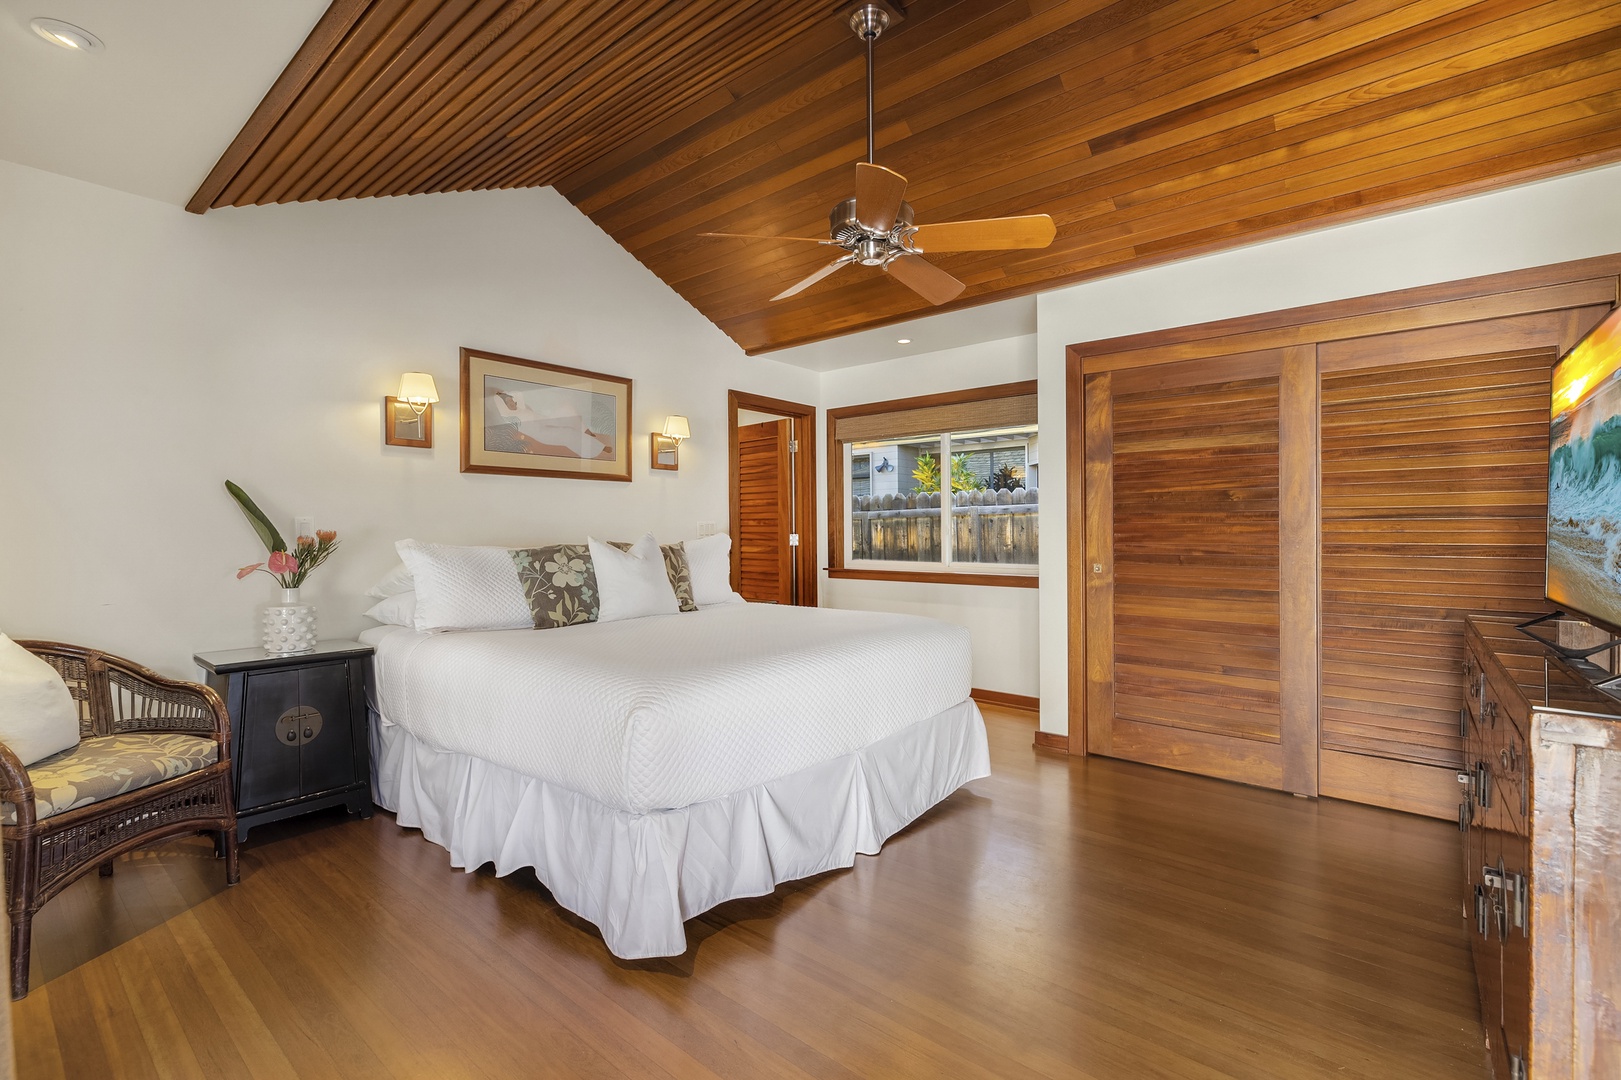 Honolulu Vacation Rentals, Hale Makai at Diamond Head - Primary Bedroom furnished with King Bed